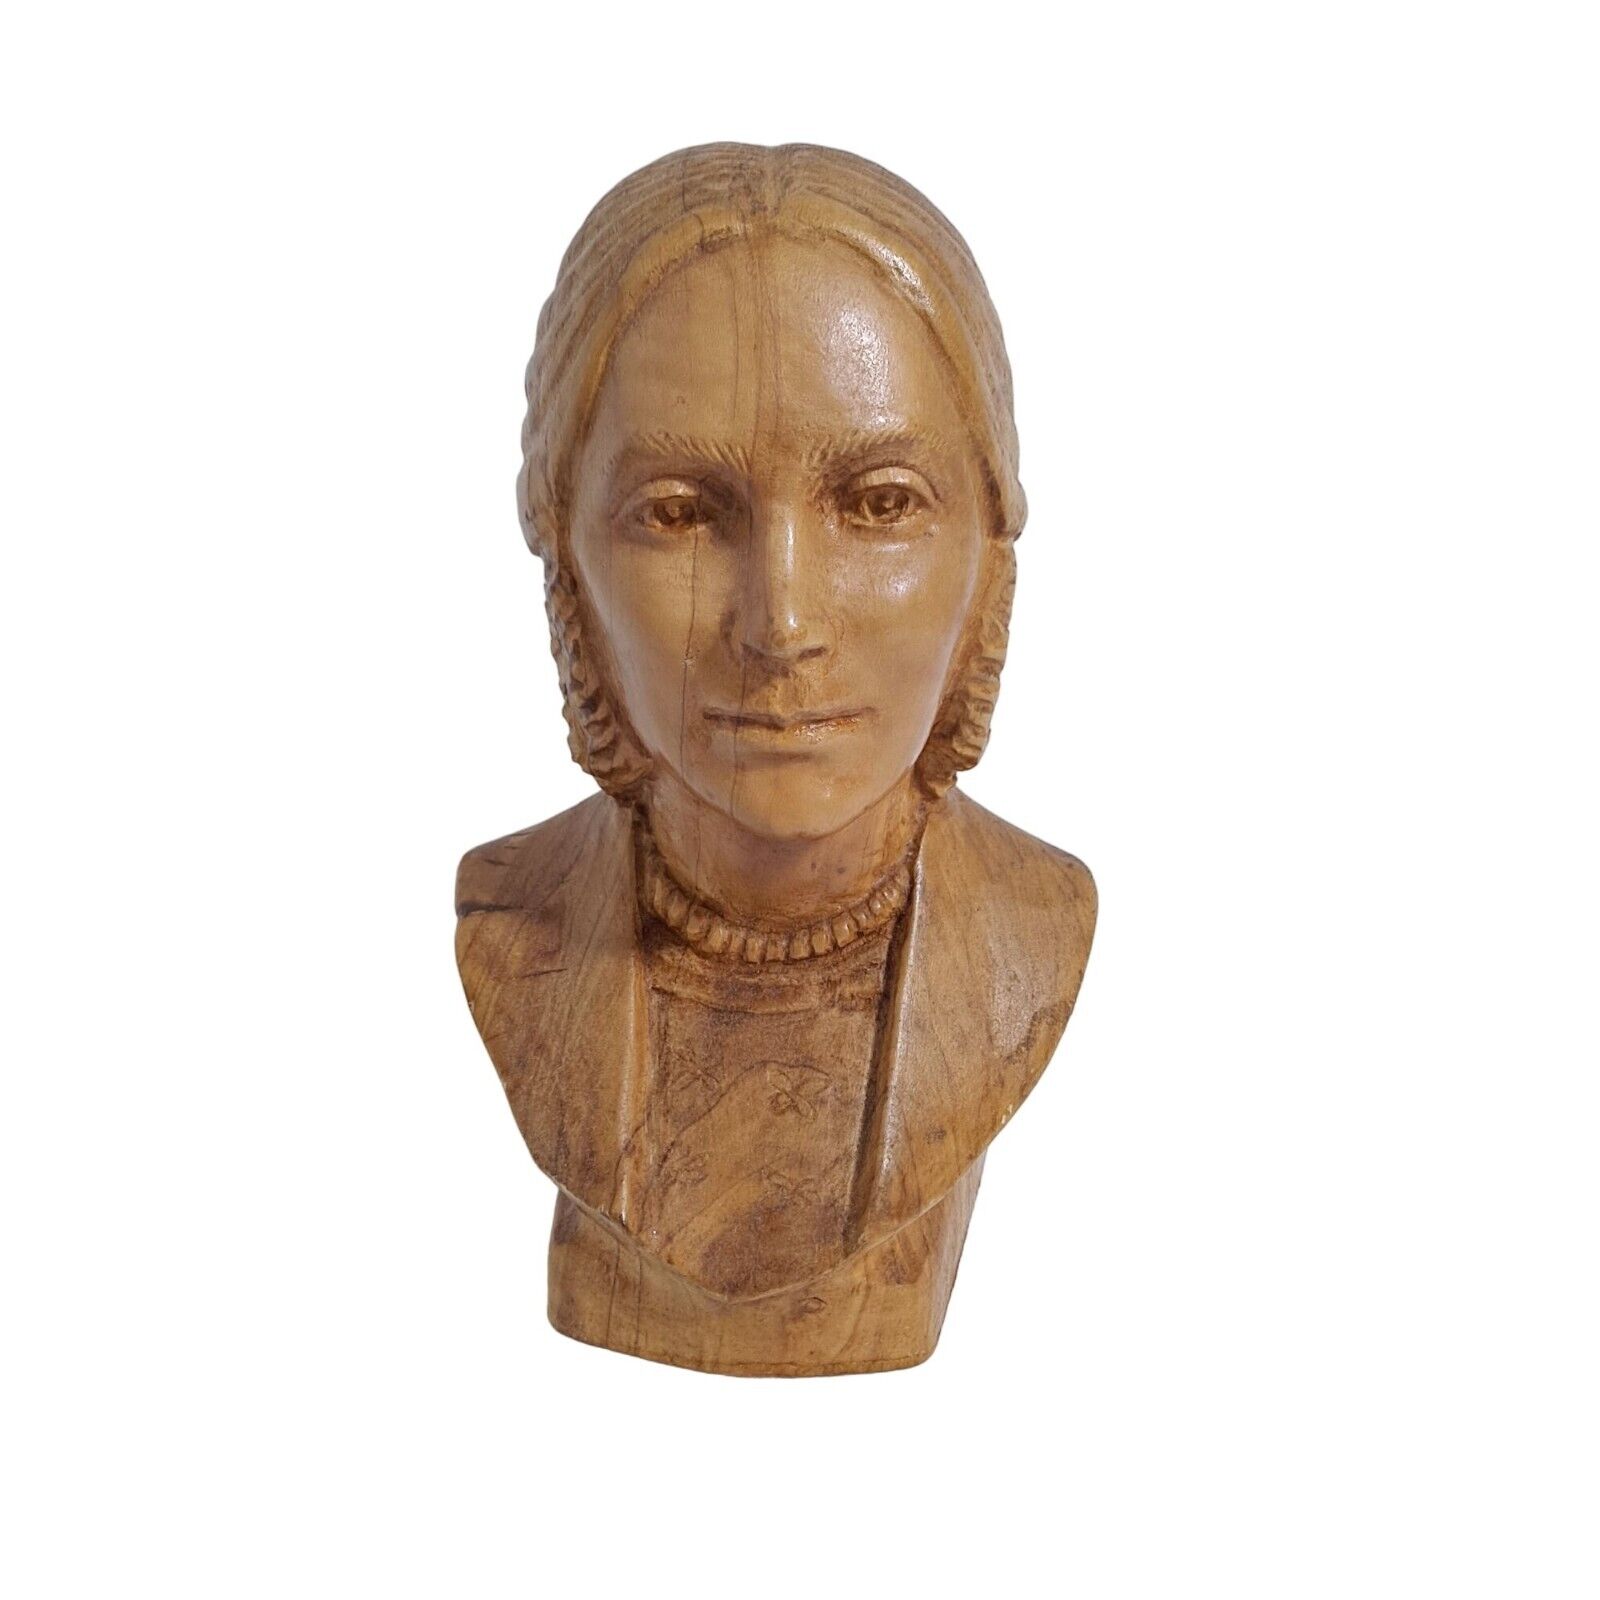 LDS Wood Carving Emma Smith (Joseph Smiths Wife) Hand Carved Latter Day Saints